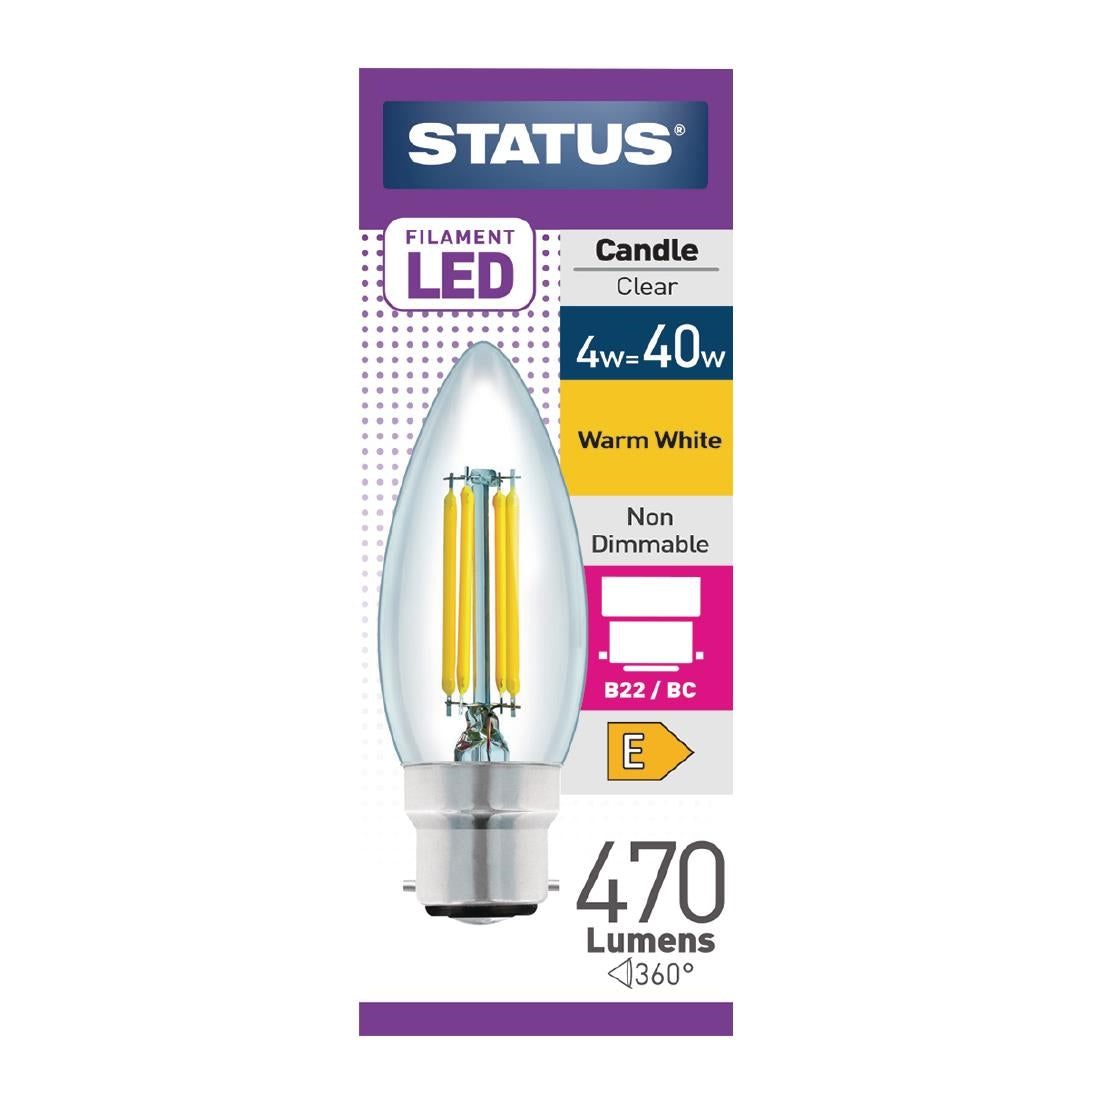 FW519 Status Filament LED Candle BC Warm White Light Bulb 4/40w JD Catering Equipment Solutions Ltd